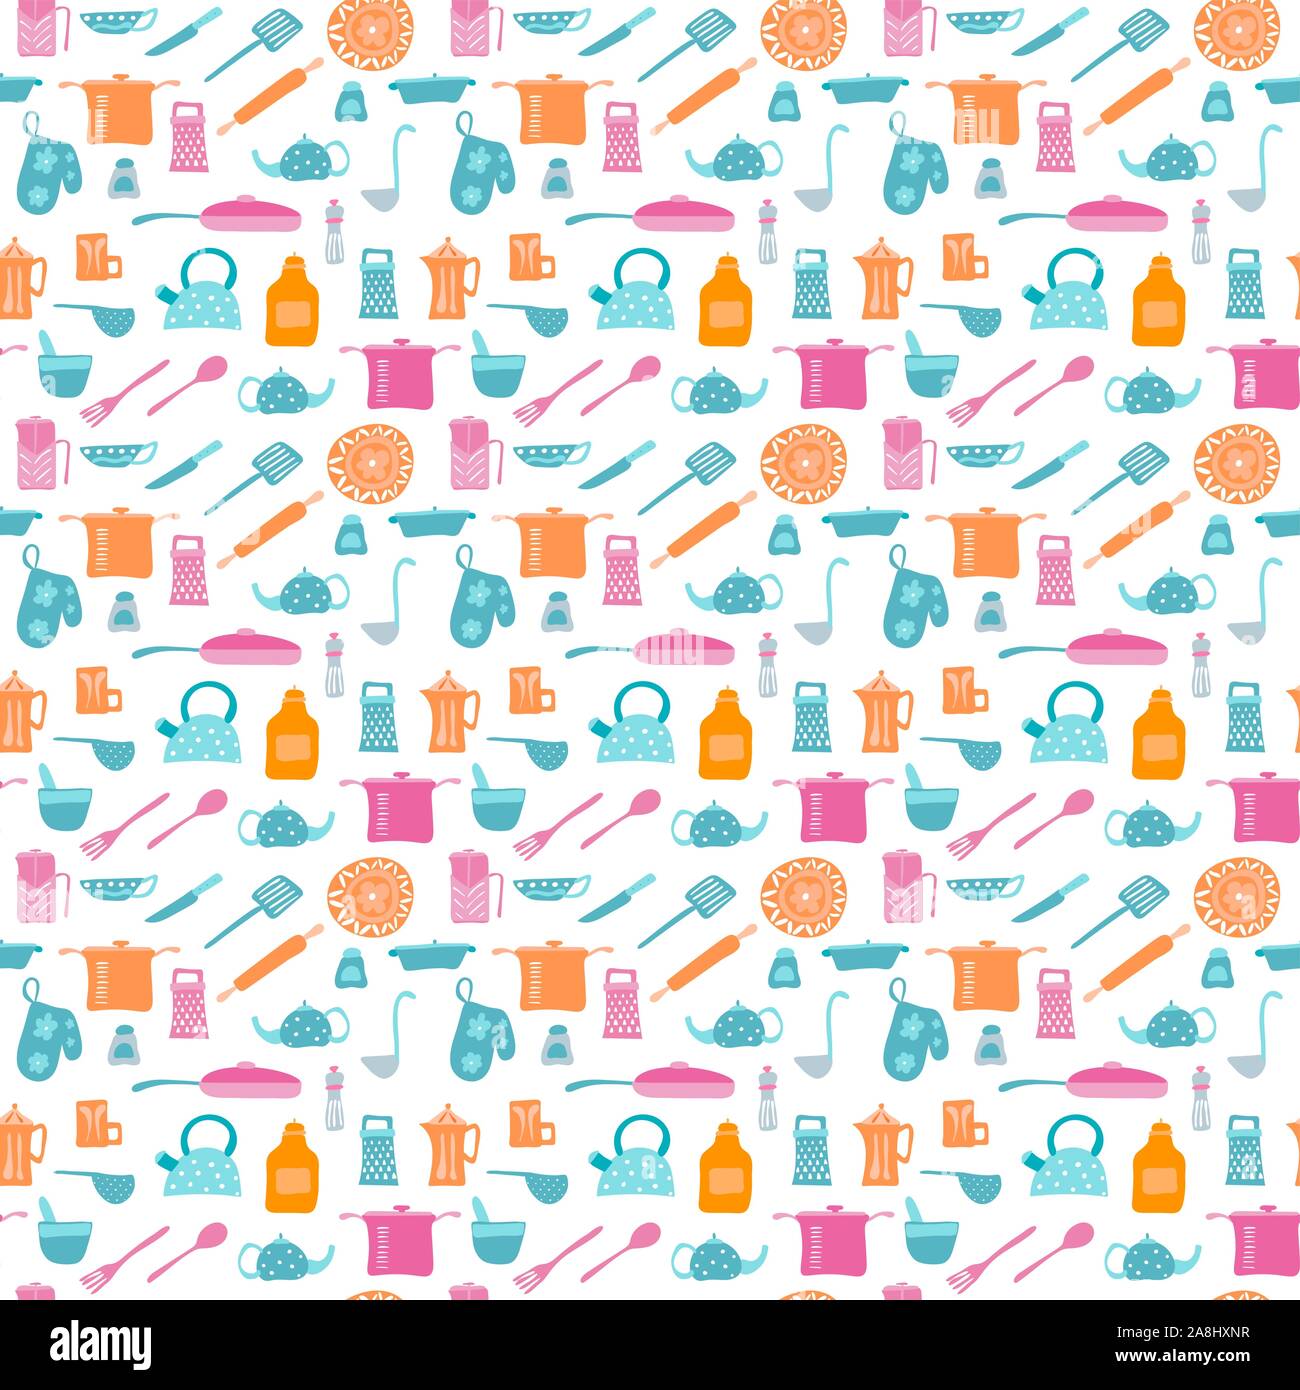 Vector Seamless pattern with kitchen items in retro style. Stock Vector